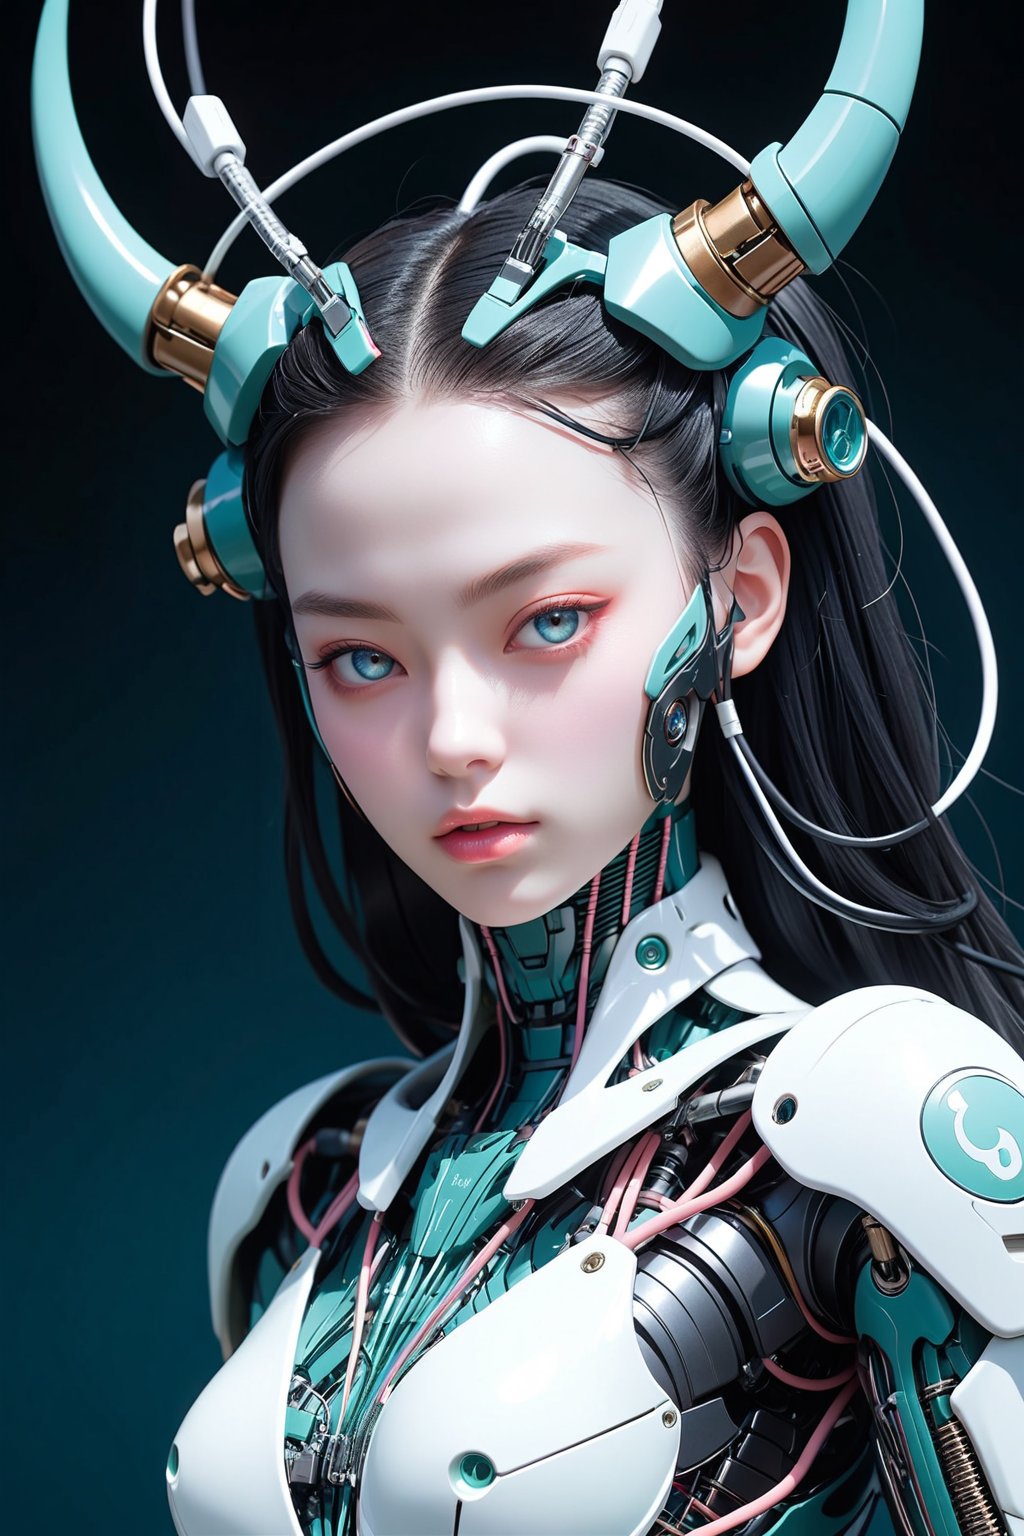 masterpiece,best quality,1mechanical girl,detailed face,shadows,8k,ultra sharp,metal,intricate,ornaments detailed,cold colors,egypician detail,highly intricate details,rending on cgsociety,facing camera,machanical limbs,mechanical cervial attaching to neck,wires and cables connecting to head,killing machine,ghost in the shell,((anime art style)),